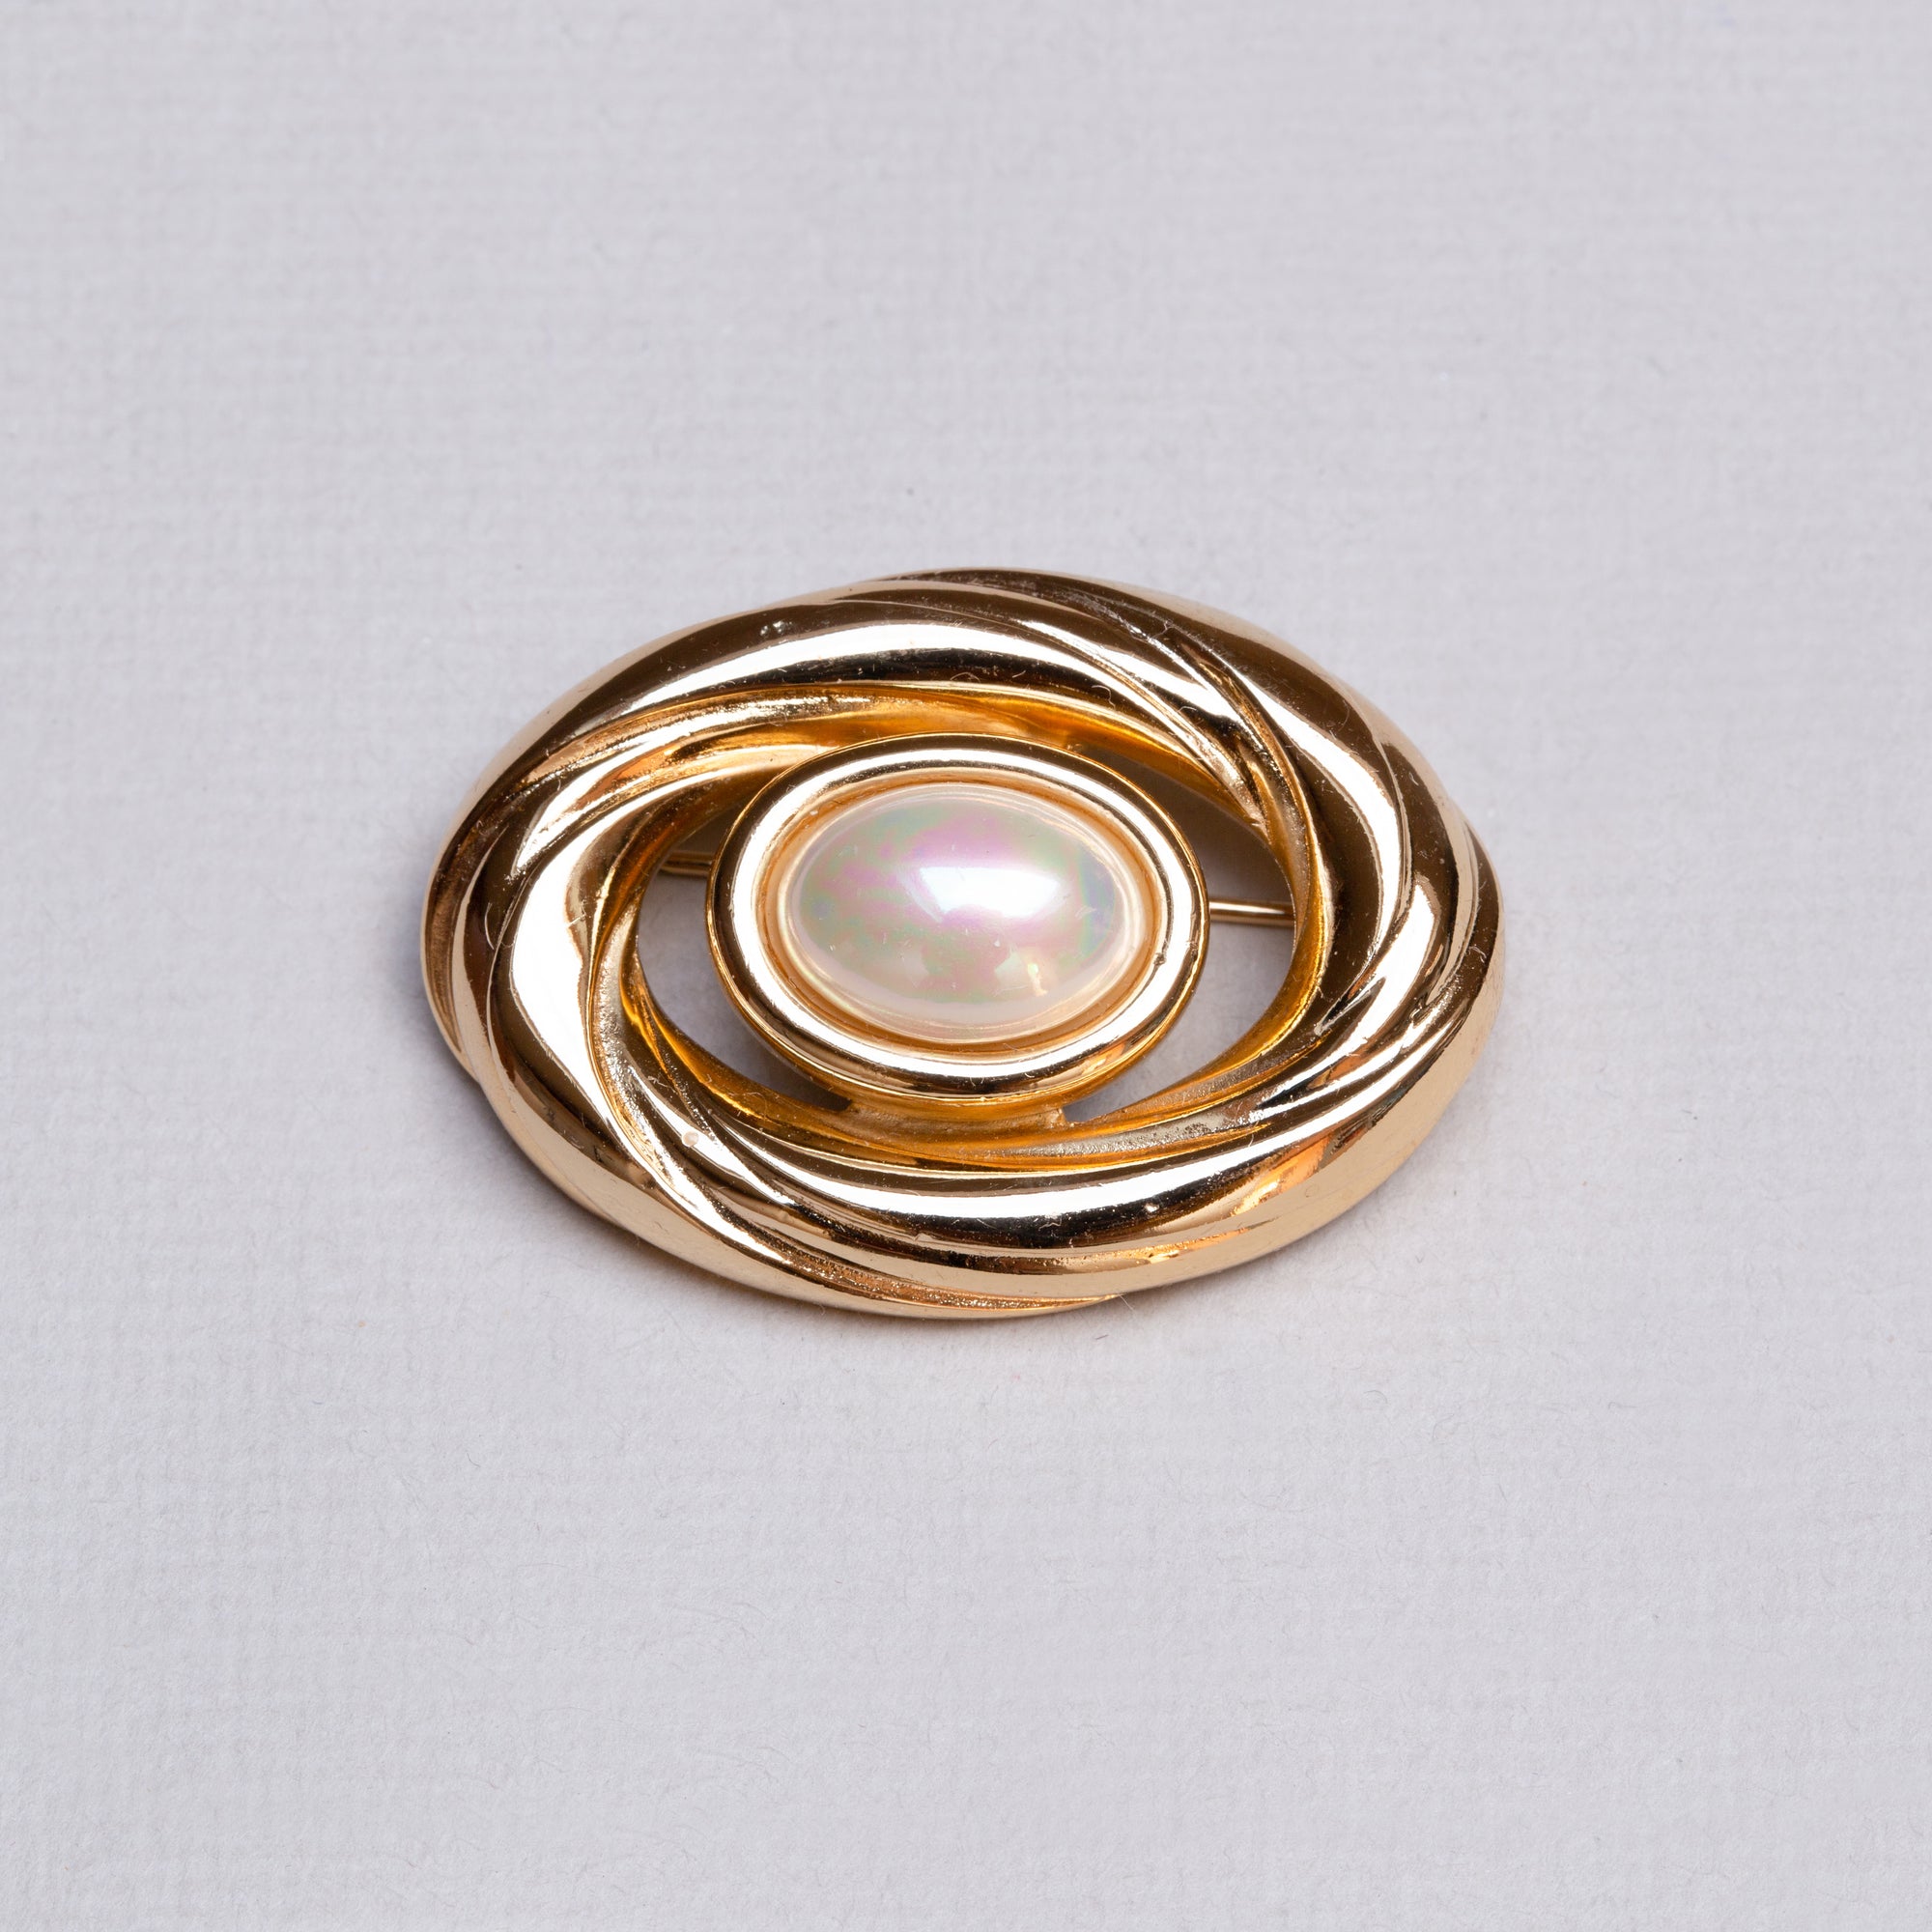 Vintage Christian Dior Gold-plated Brooch with Pearl